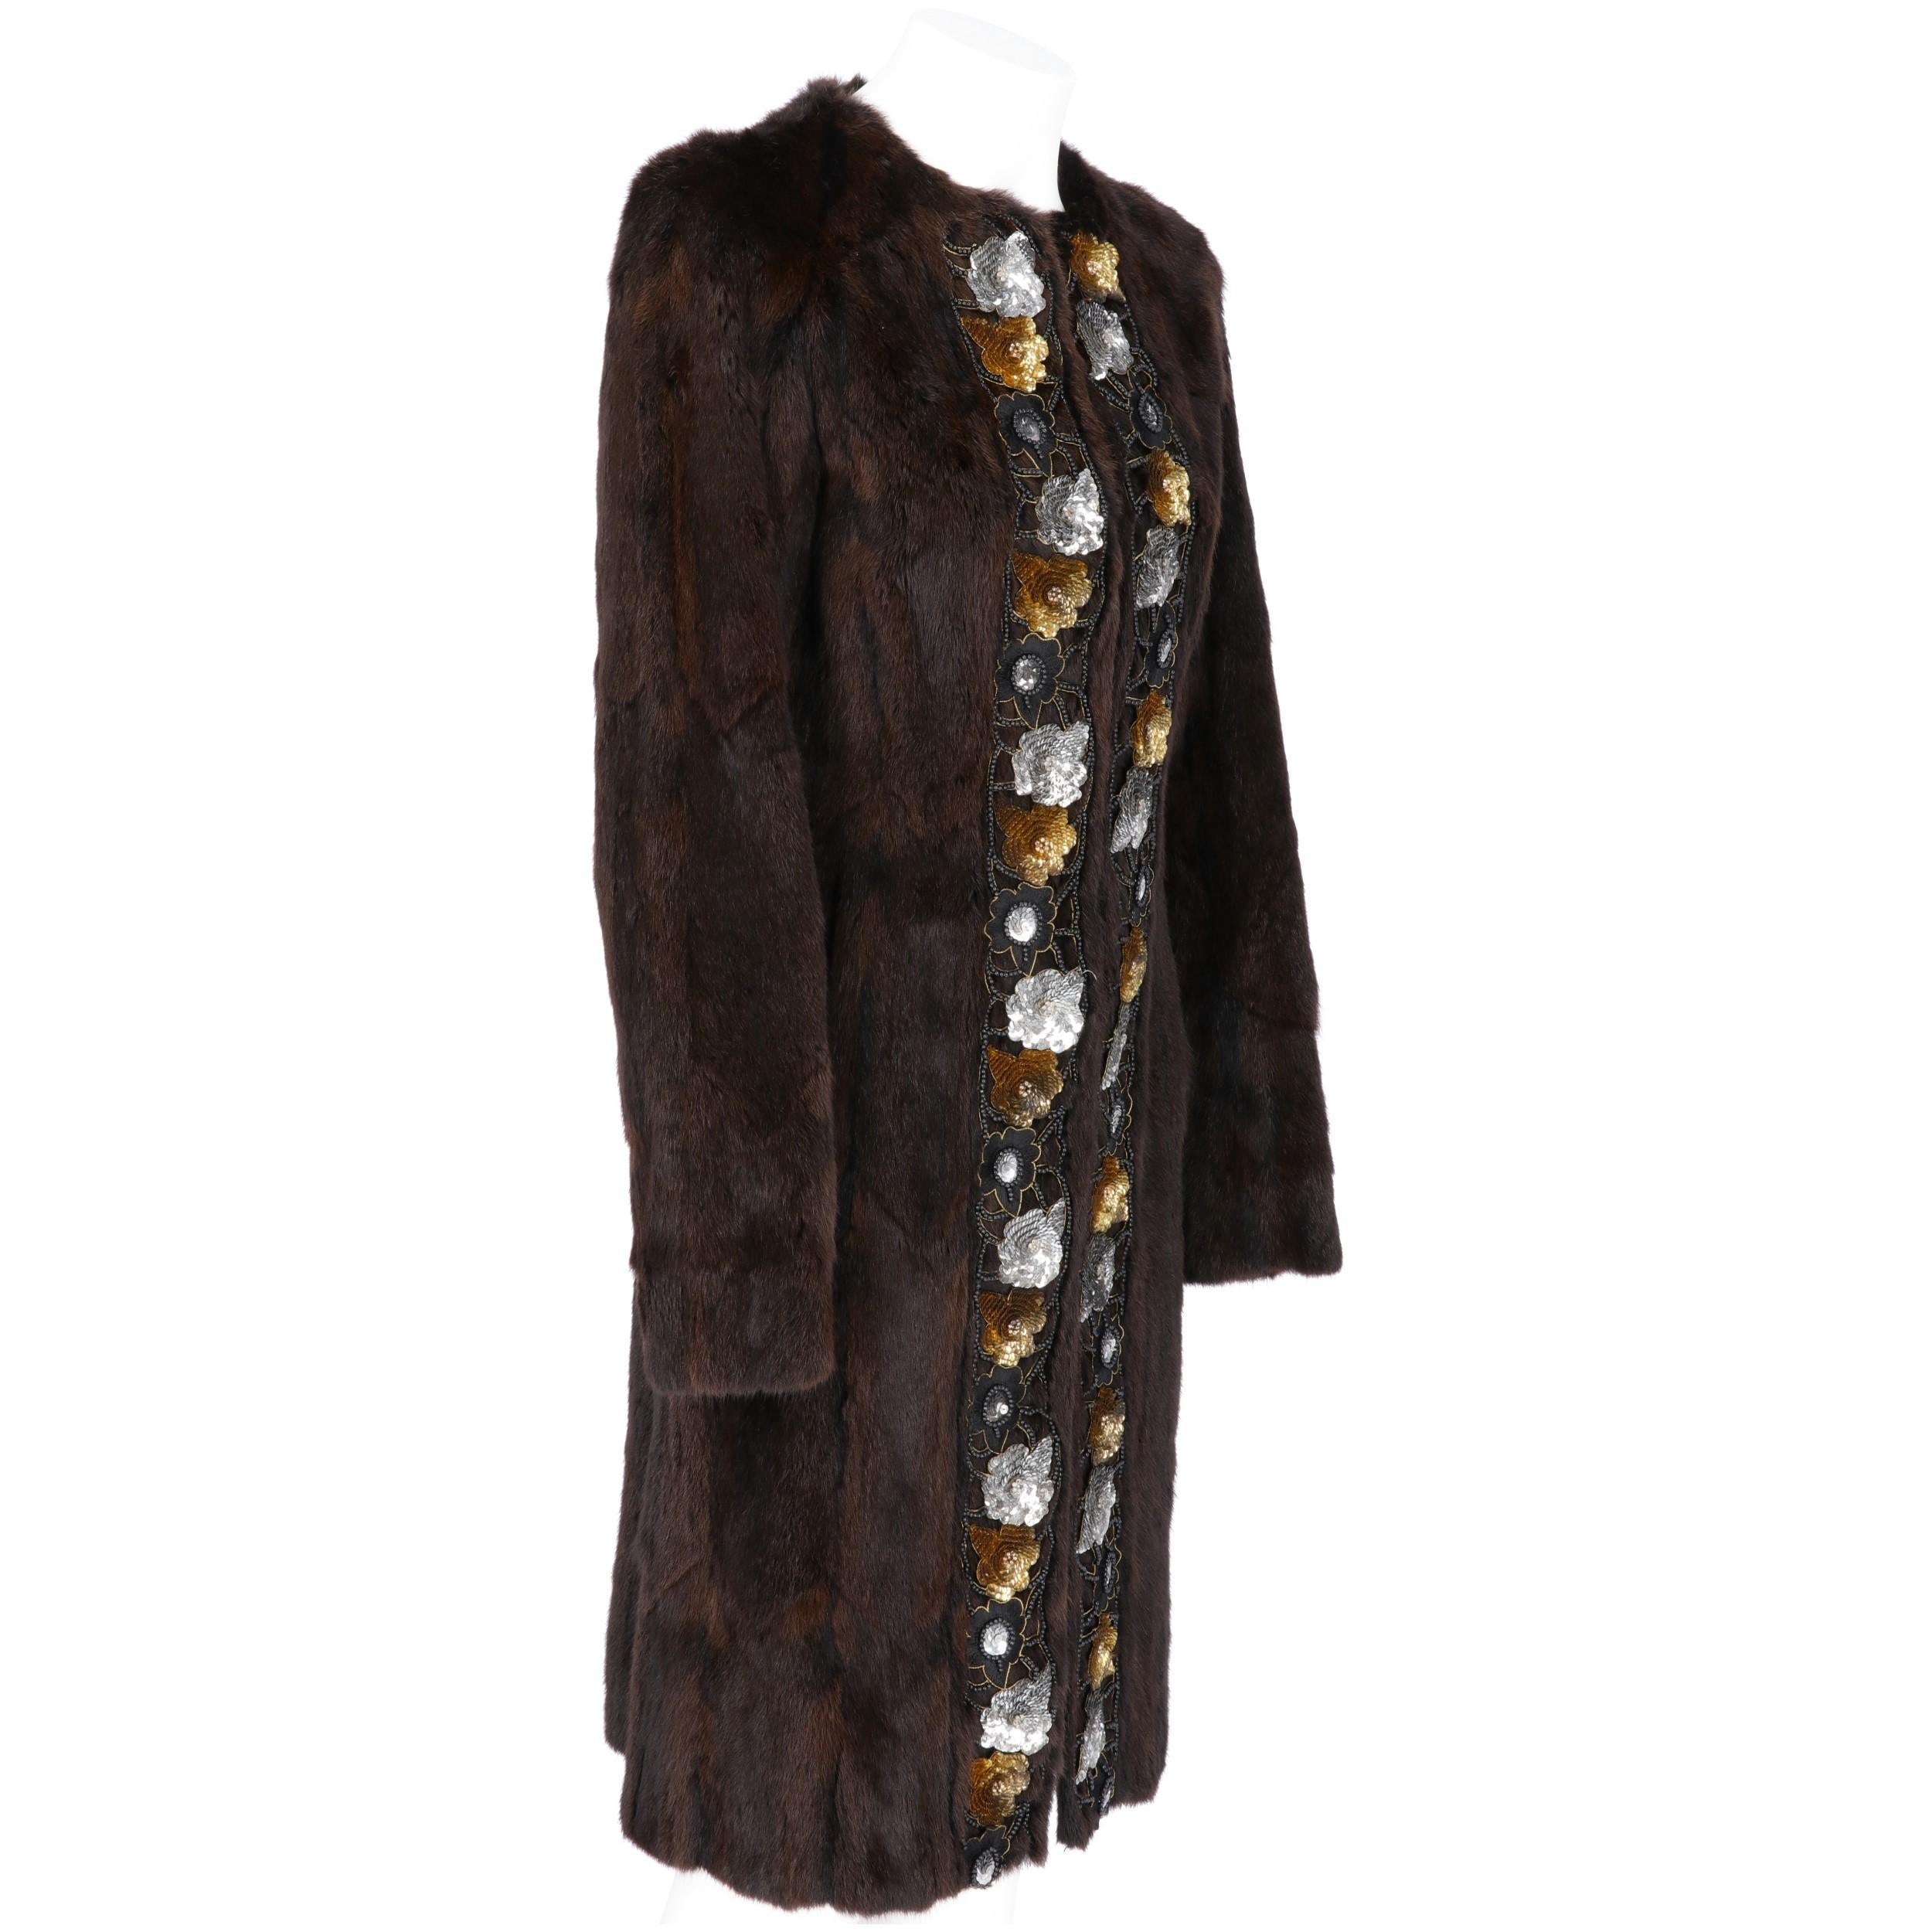 Miu Miu brown hamster midi fur. Round-neck collar, hidden hooks fastening. Beads and sequins floral frontal embroidery. Long sleeves and hidden pockets. Leather lined.

Size: 40 IT  

Flat measurements
Height: 100 cm
Bust: 43 cm
Shoulders: 42